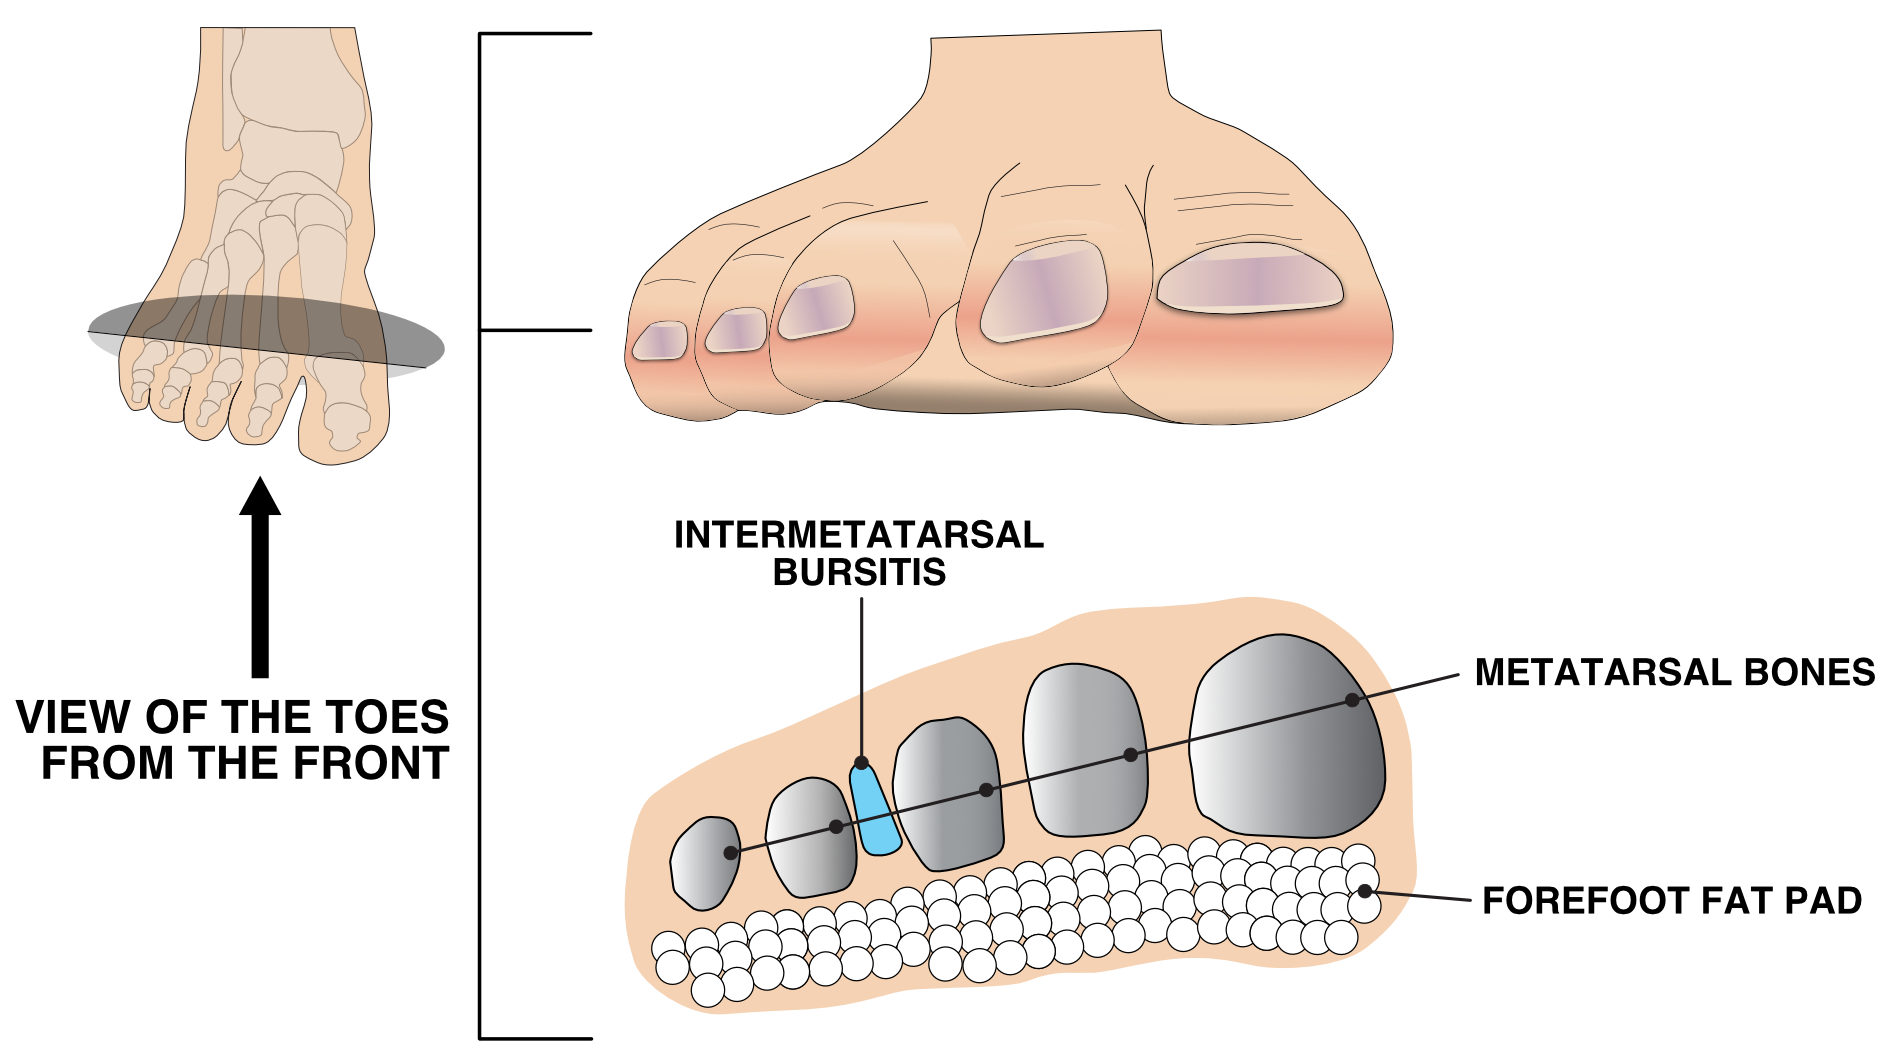 Illustration of forefoot displaying the intermetatarsal burisitis in between the metatarsals